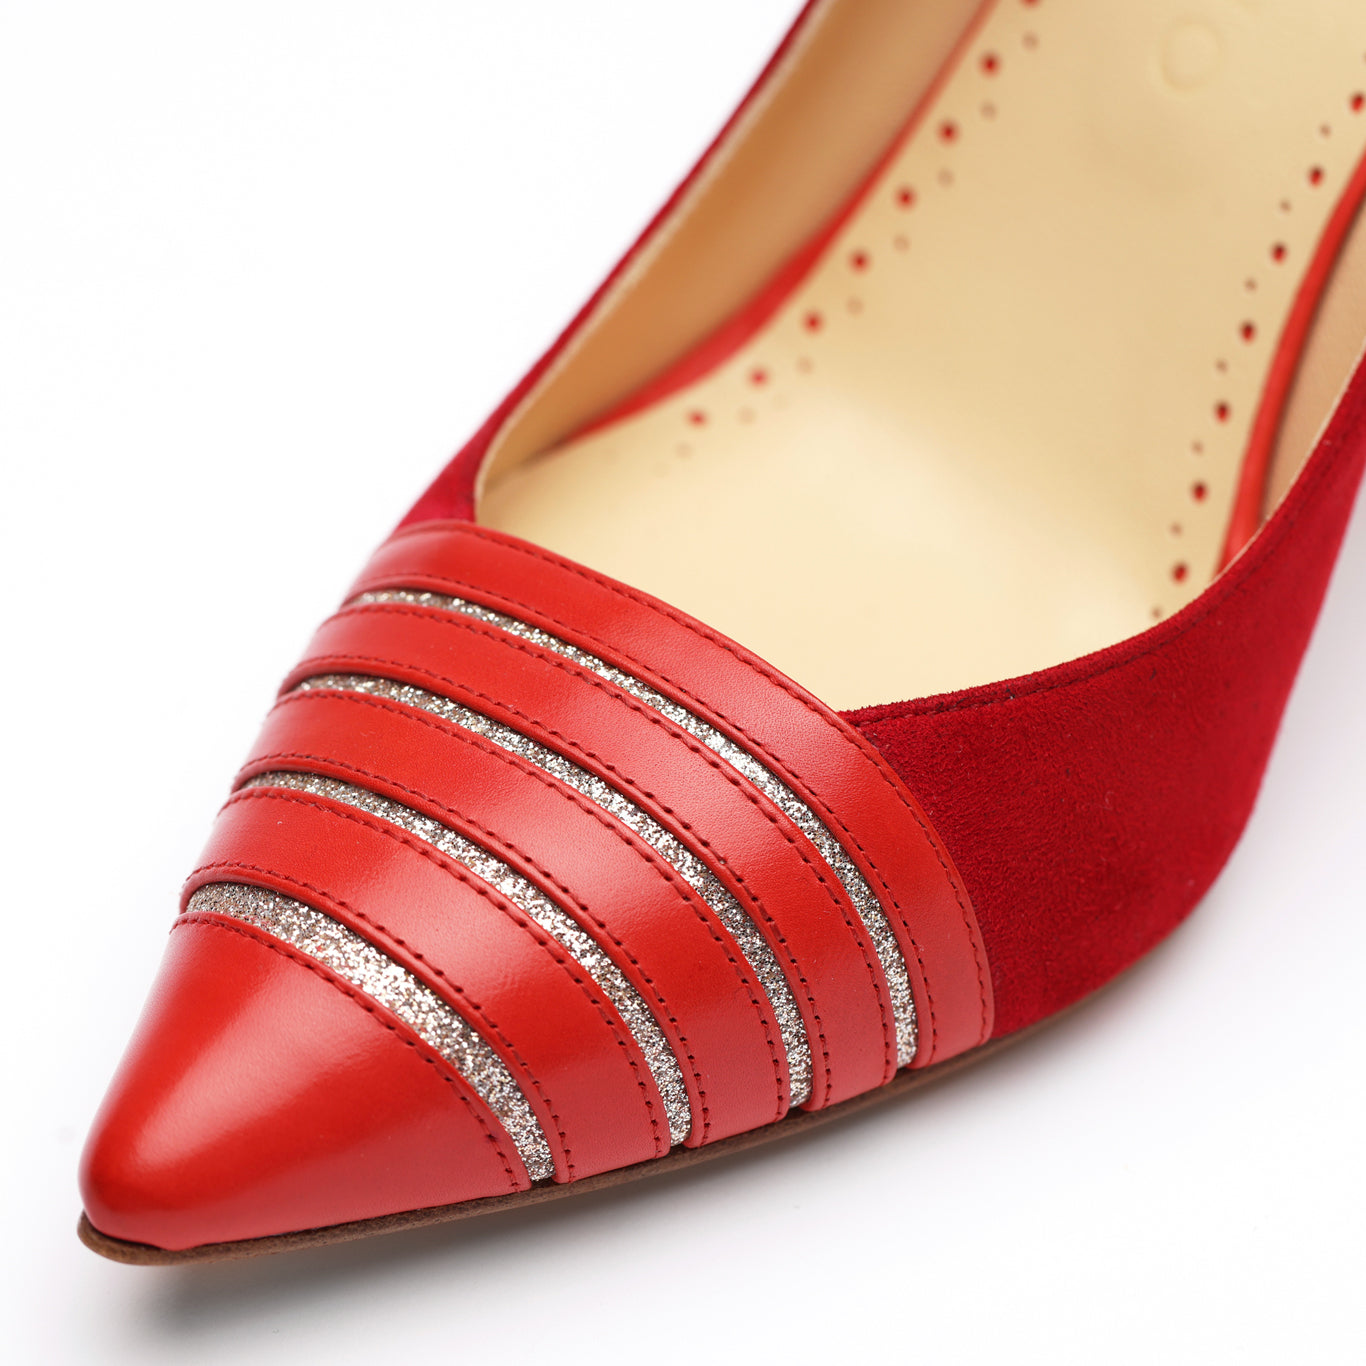 [women's] reunion - striped pumps - red suede x red baby calfskin